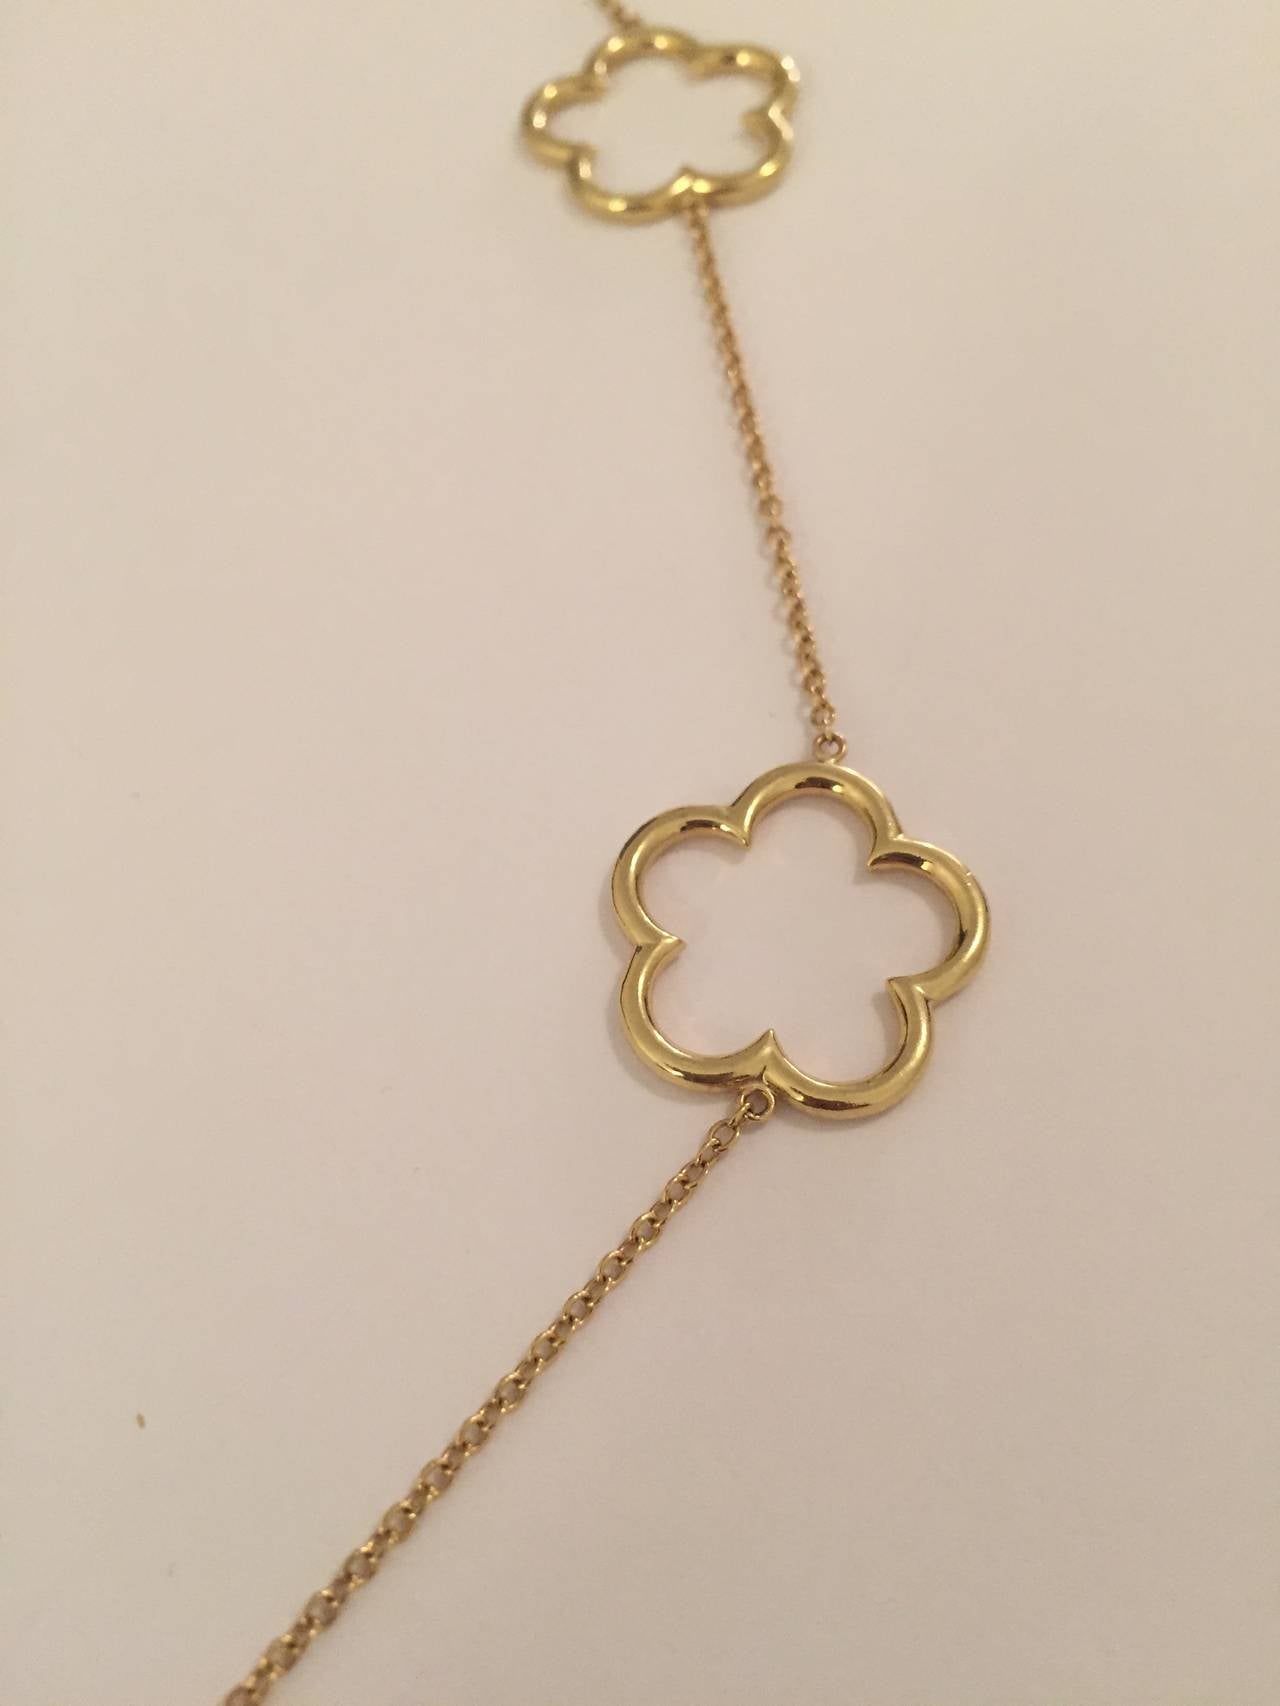 18kt Yellow Gold 5 Open Clover station Necklace with 5 elegant statement open work Clovers laying beautifully on the neck line and is finished with a lobster closure.

This necklace is 17